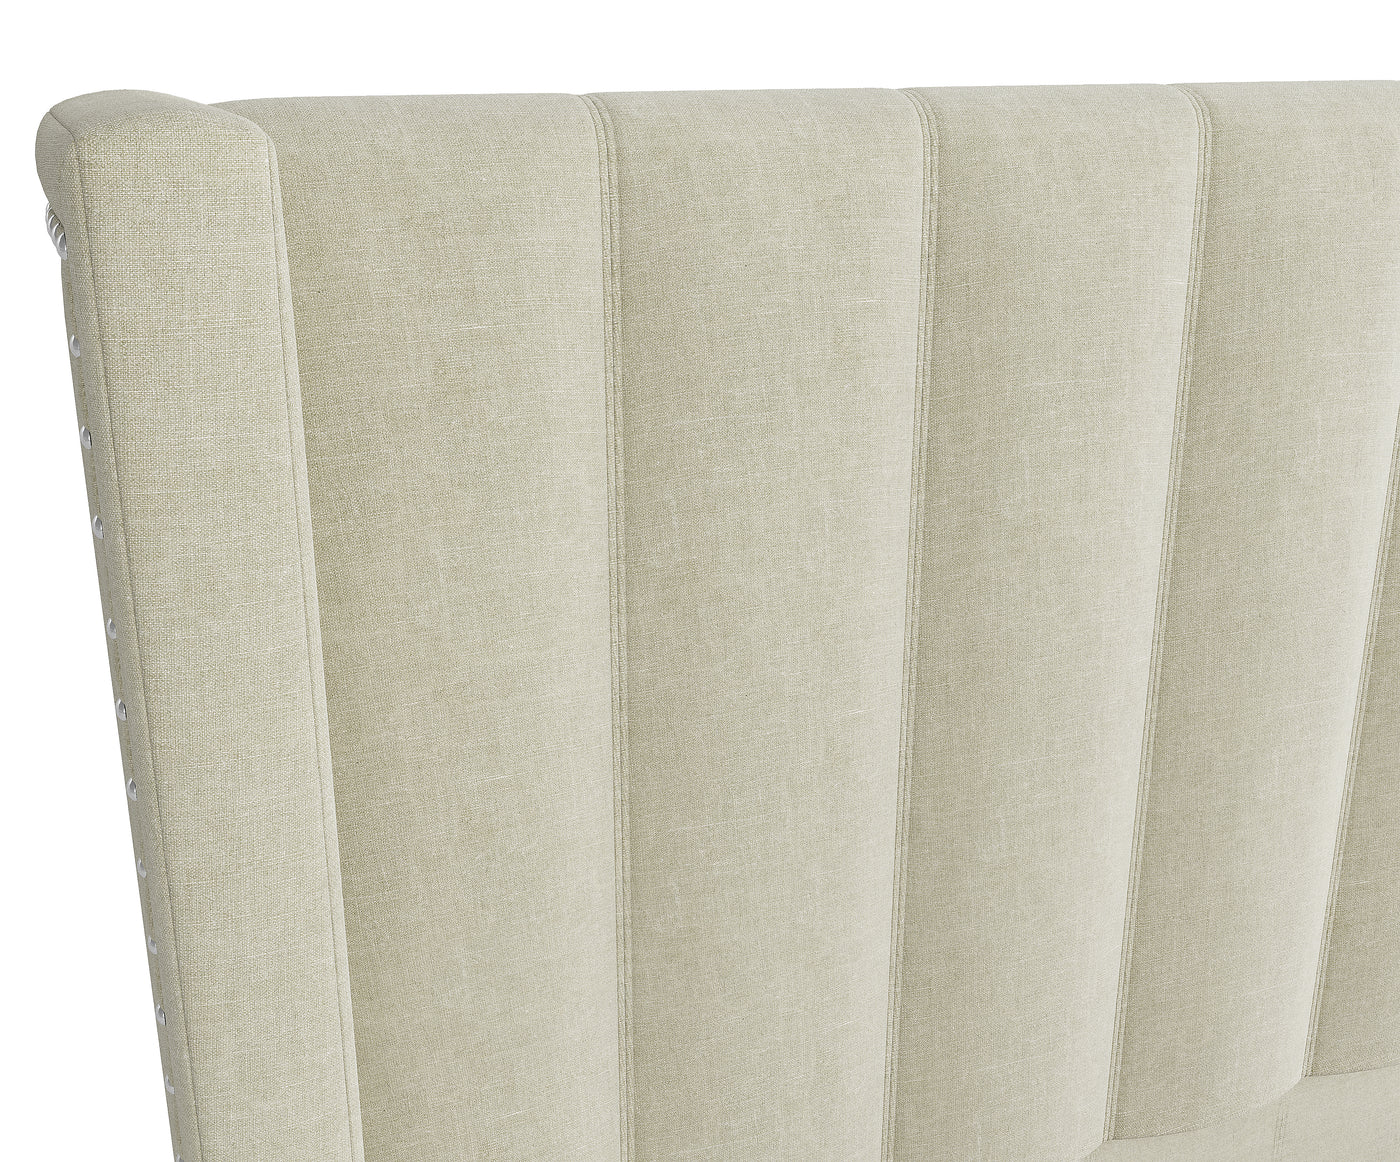 Bentleigh Gas Lift Storage Bed Frame (Stone Beige Linen Fabric) and Windsor Latex Pocket Spring Mattress Combo Deal (7841918157054)